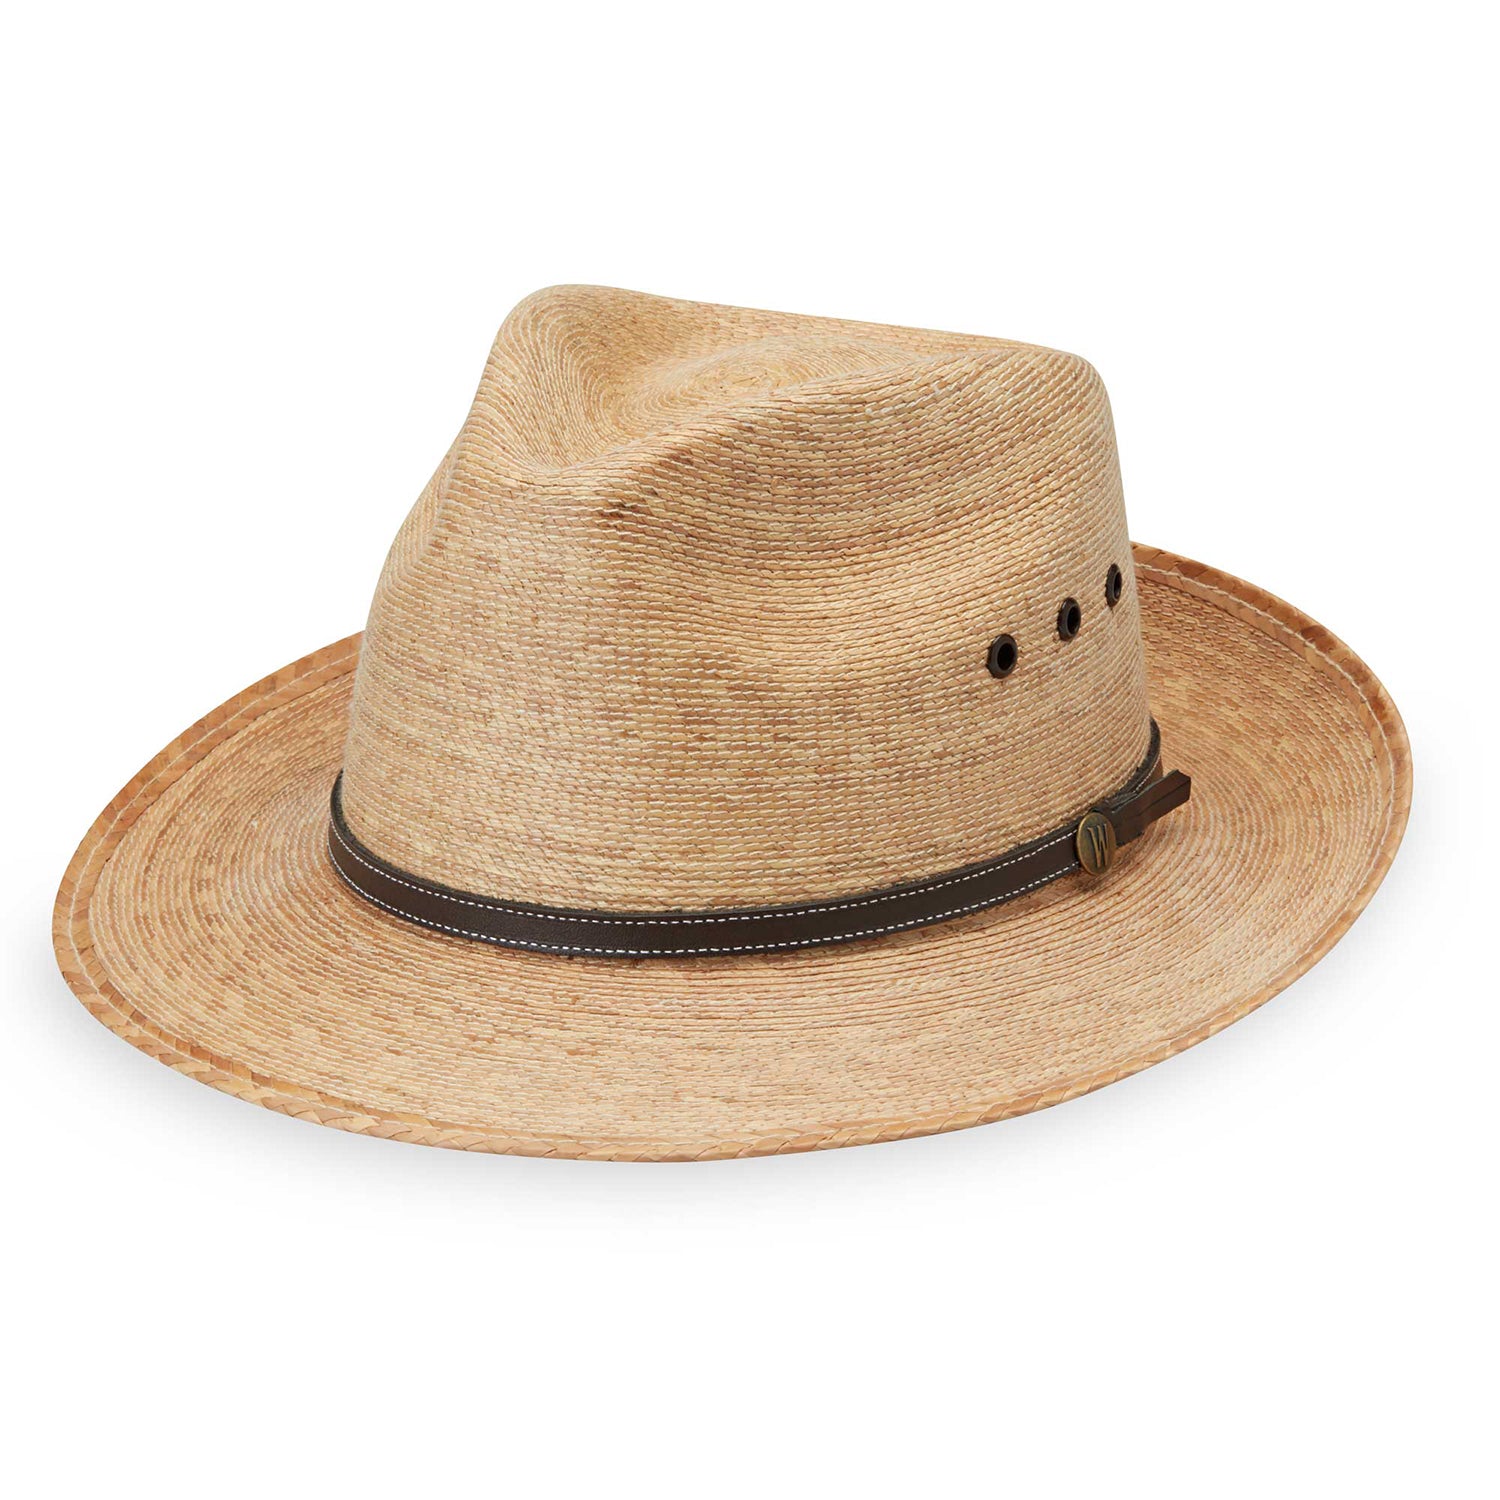 Featuring Fedora trilby style Cortez straw summer sun hat made with all-natural fiber by Wallaroo